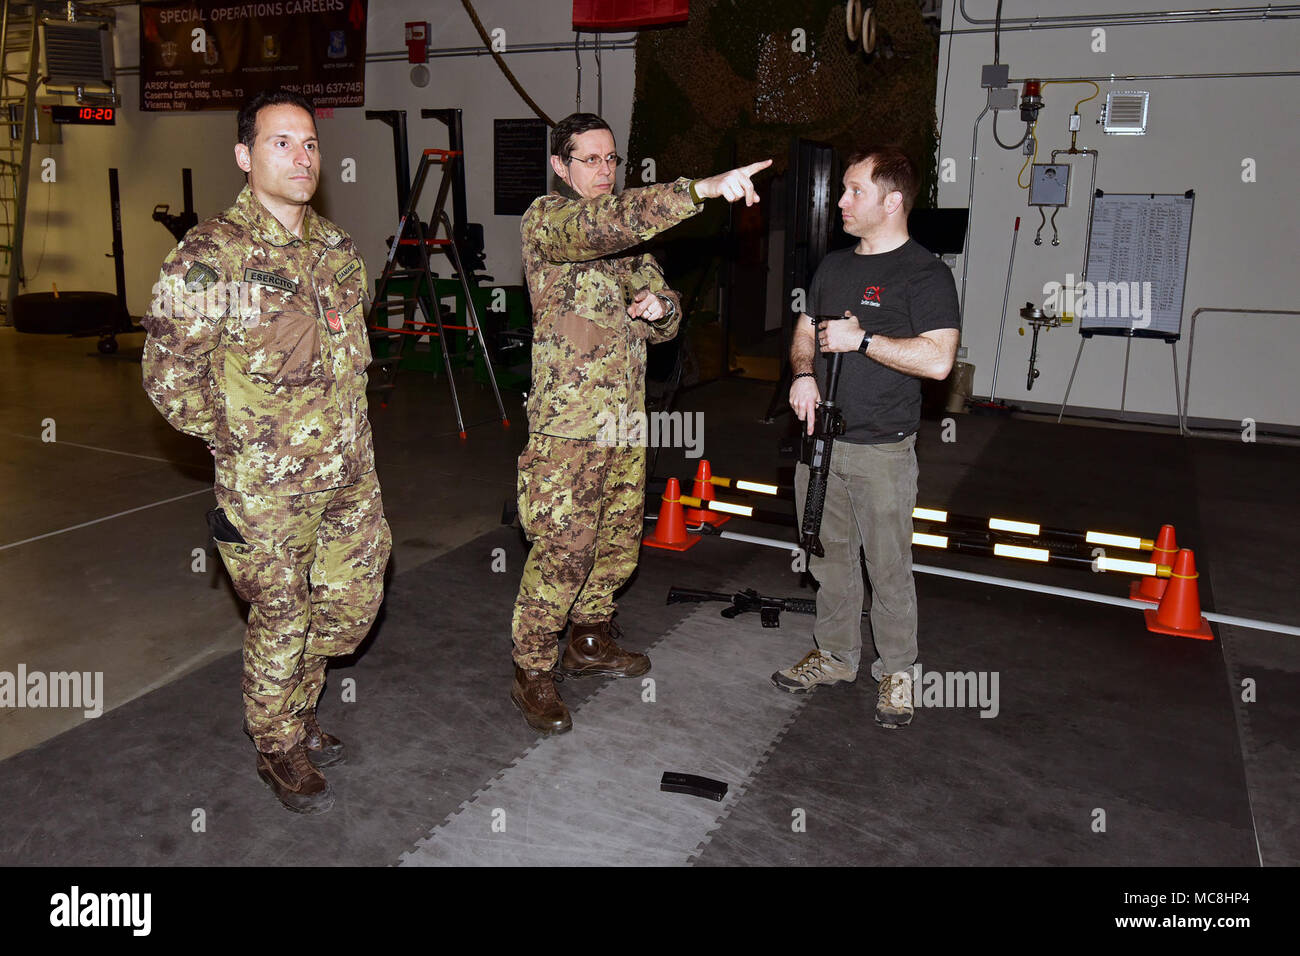 Michael Kennicker, instructor Gunfighter Gym (right), meets Lt. Col. Giuseppe Galloro Chief Training Office of the 85th Reggimento Addestramento Volontari “Verona” (center) and Caporale Maggiore Capo Scelto Damiano (left), at Gunfighter Gym , Caserma Del Din, Vicenza, Italy, March 28, 2018. Italian Soldiers use U.S. Army RTSD South equipment to enhance bilateral relations and to expand levels of cooperation and the capacity of the personnel involved in joint operations. Stock Photo